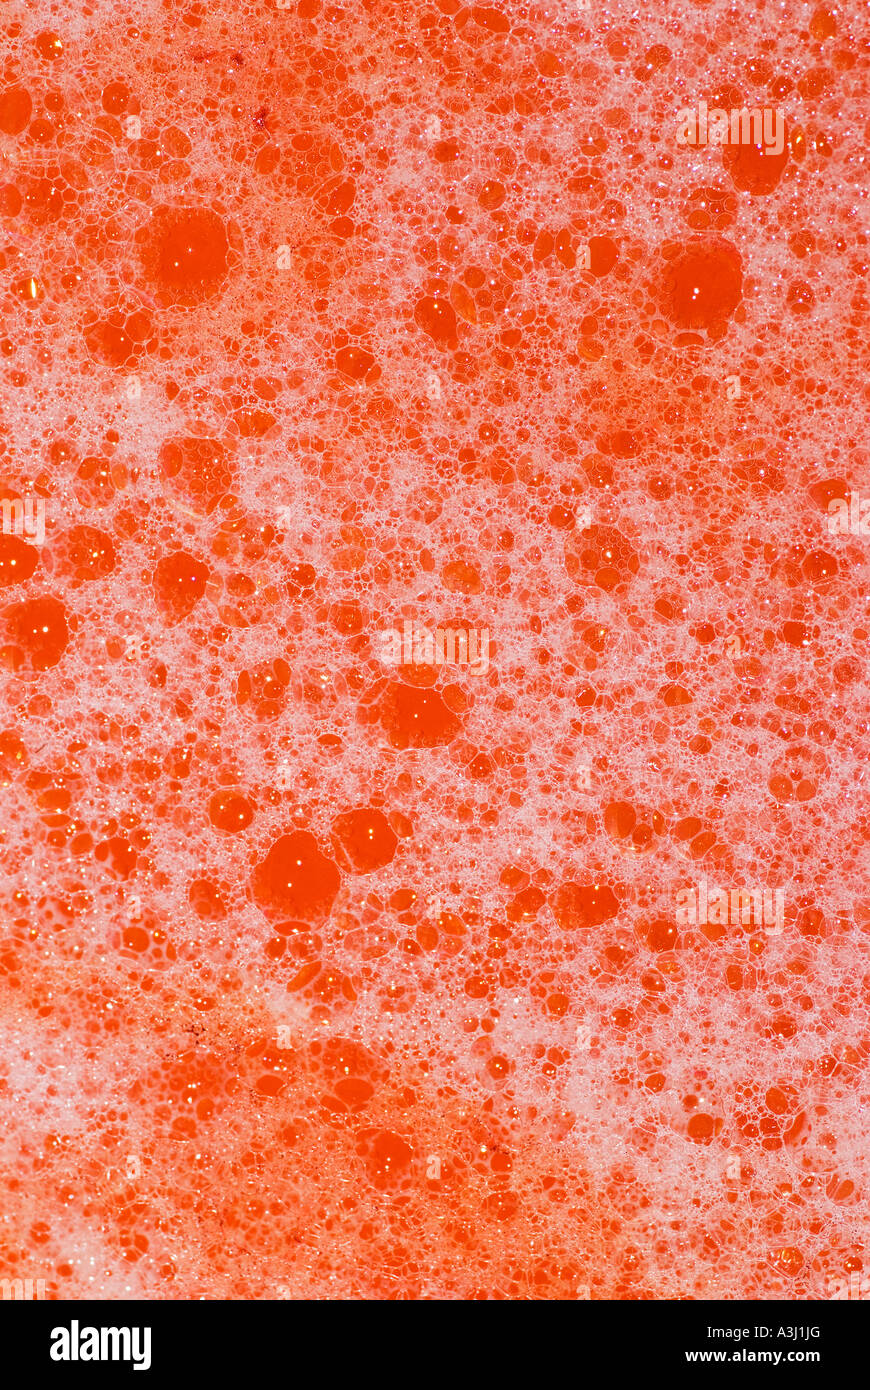 Red bathwater with bubbles Stock Photo